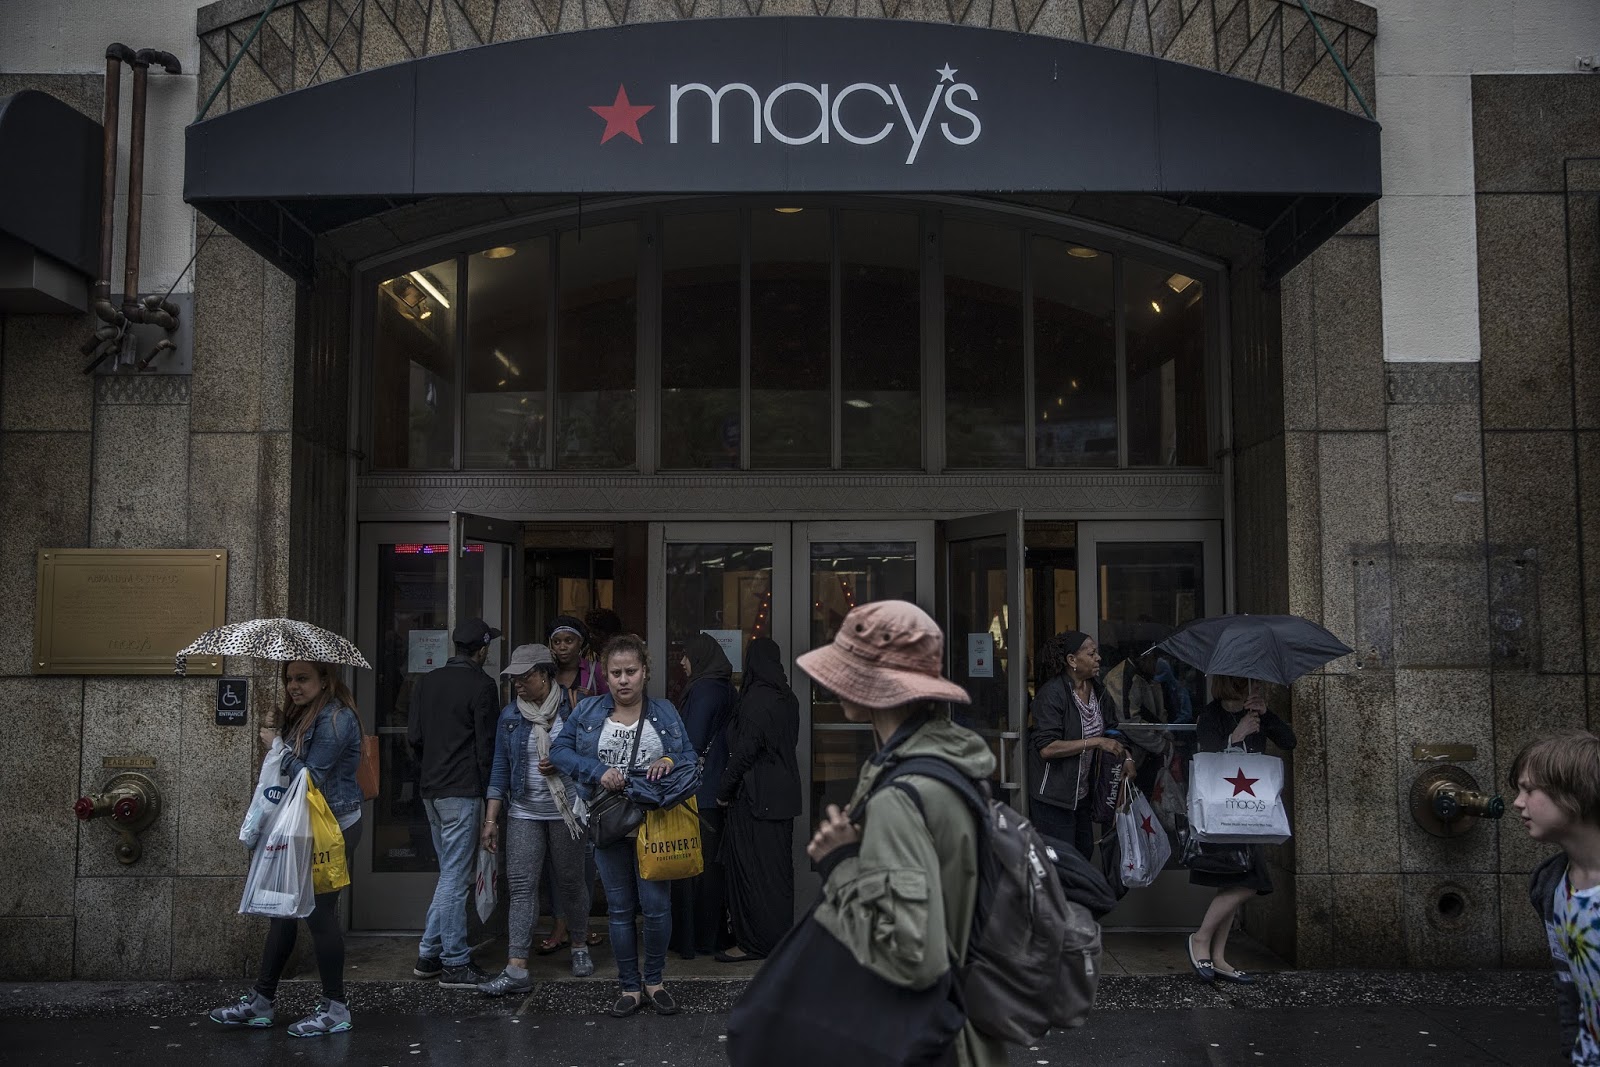 0 The Following Macy&#39;s Stores are Closing in Early 2018.